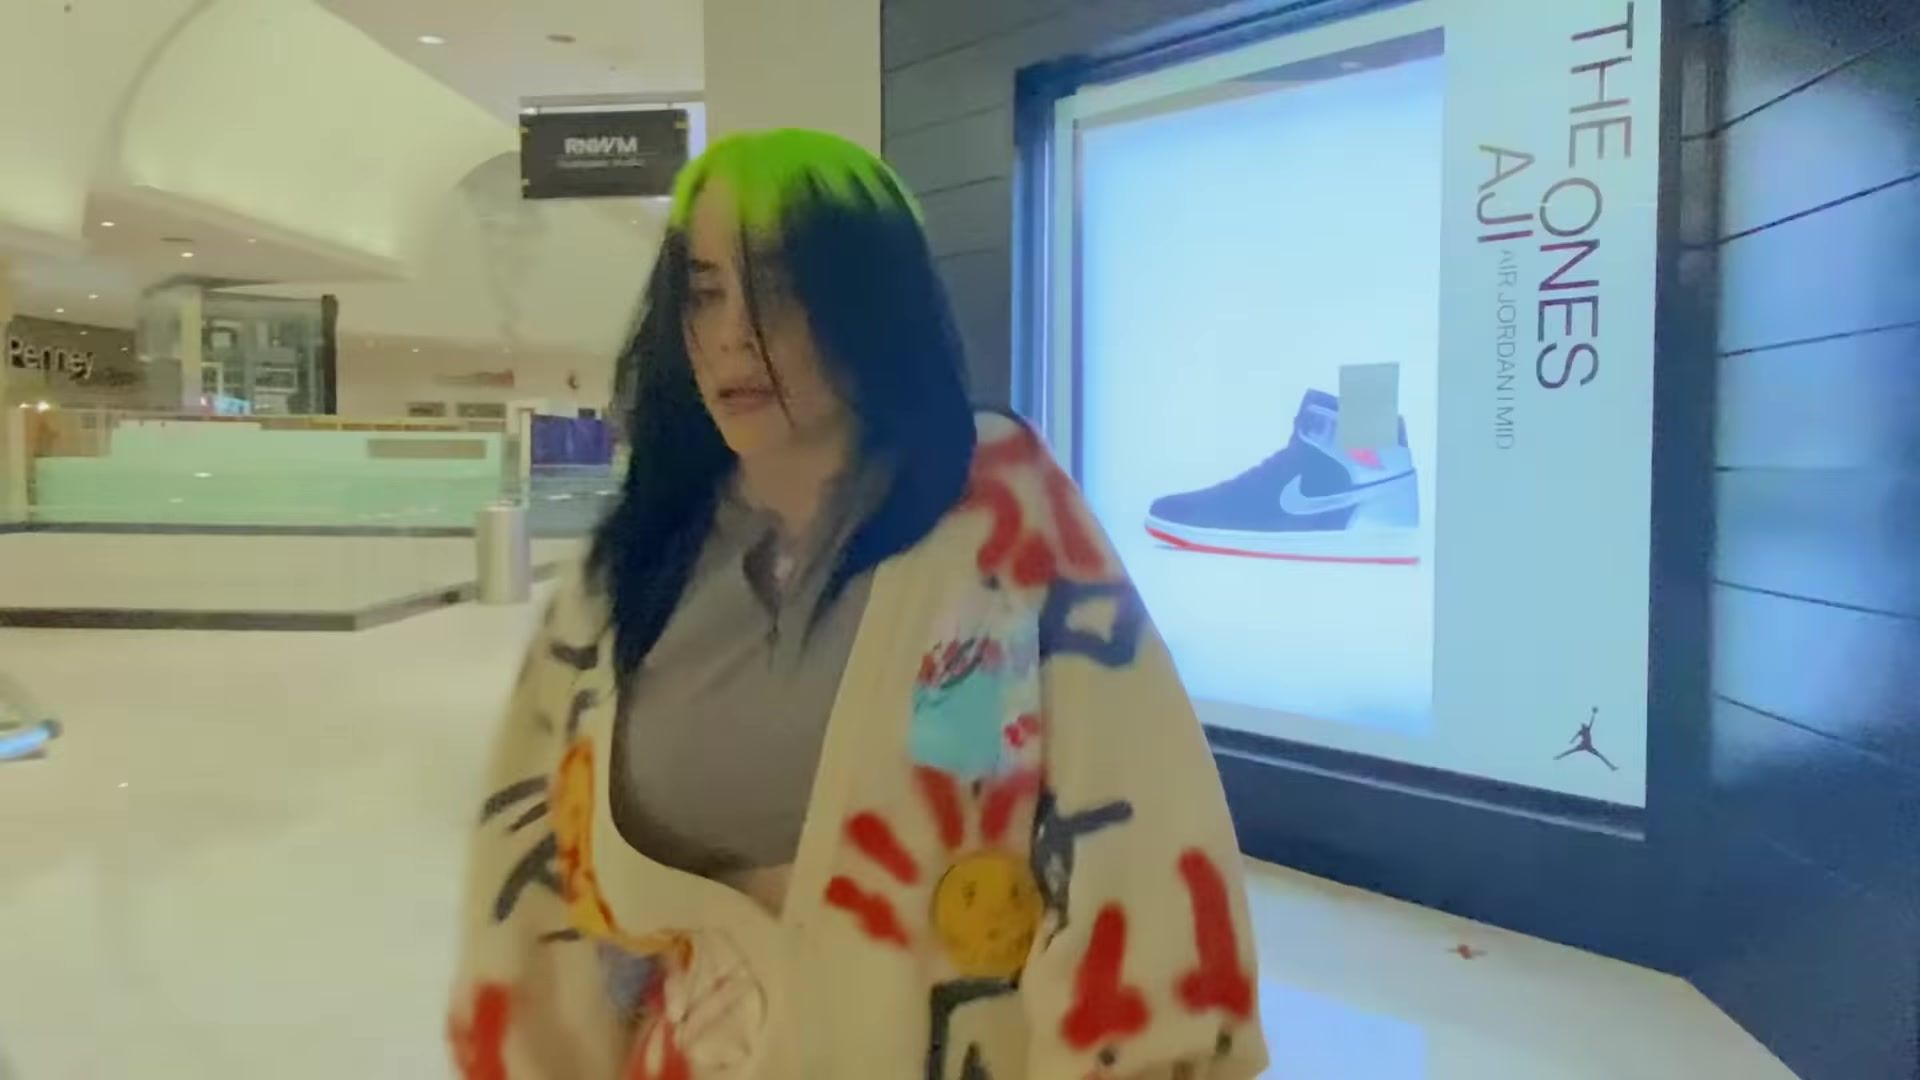 Nike Air Jordan Mid Sneakers In 'Therefore I Am' By Billie Eilish (2020)